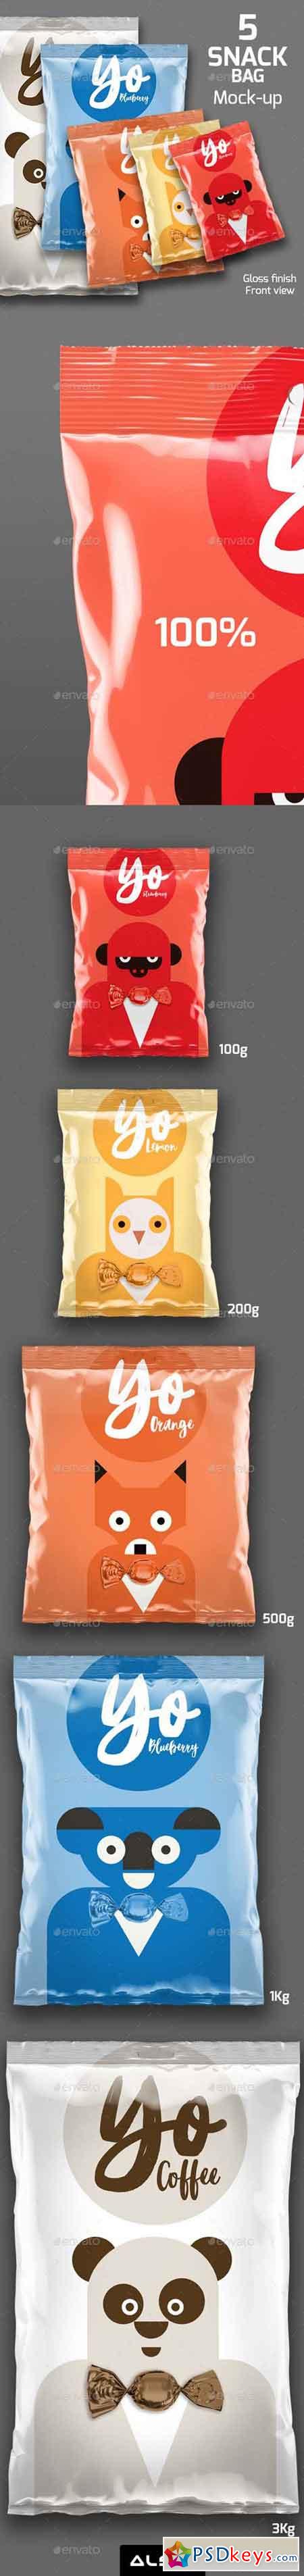 5 Snack Bags Mock-up 19747598